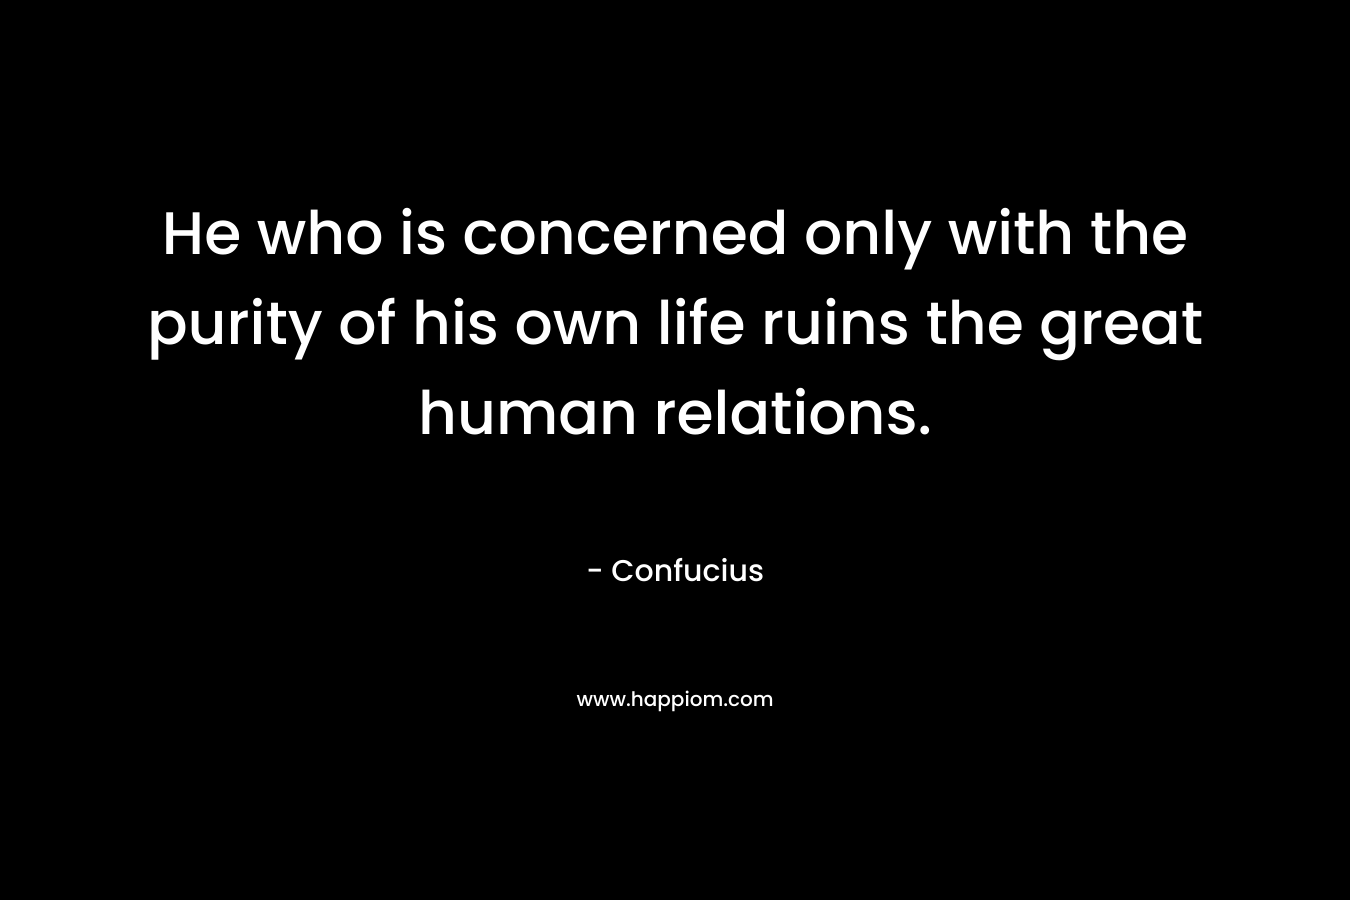 He who is concerned only with the purity of his own life ruins the great human relations. – Confucius